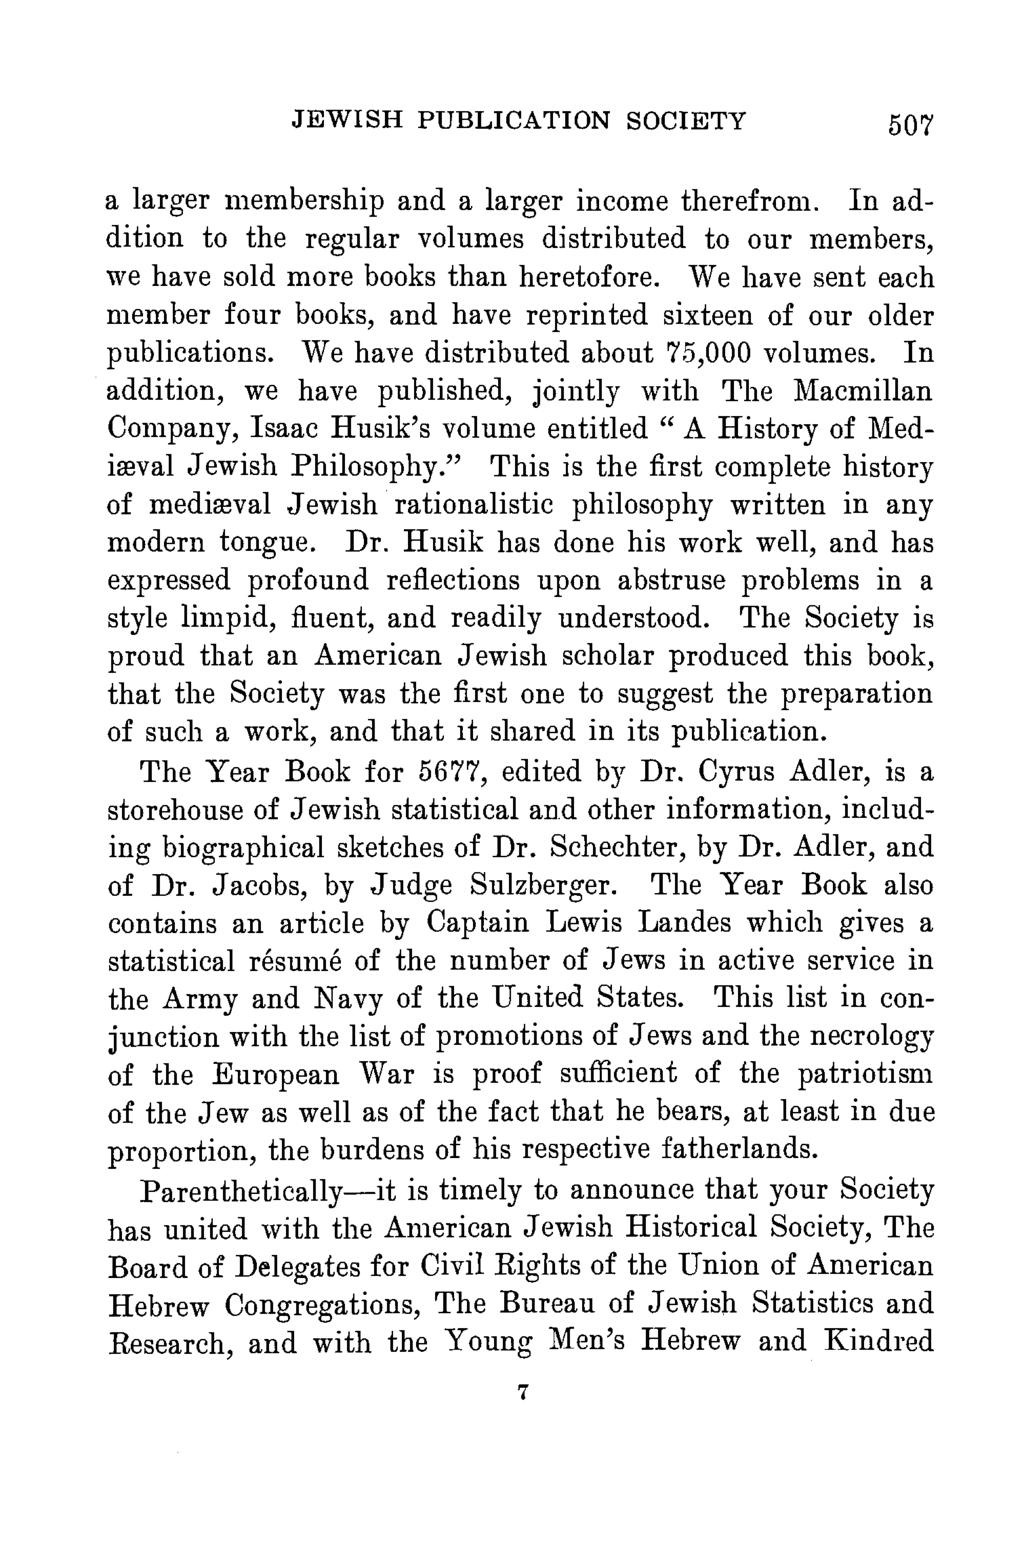 JEWISH PUBLICATION SOCIETY 507 a larger membership and a larger income therefrom. In addition to the regular volumes distributed to our members, we have sold more books than heretofore.